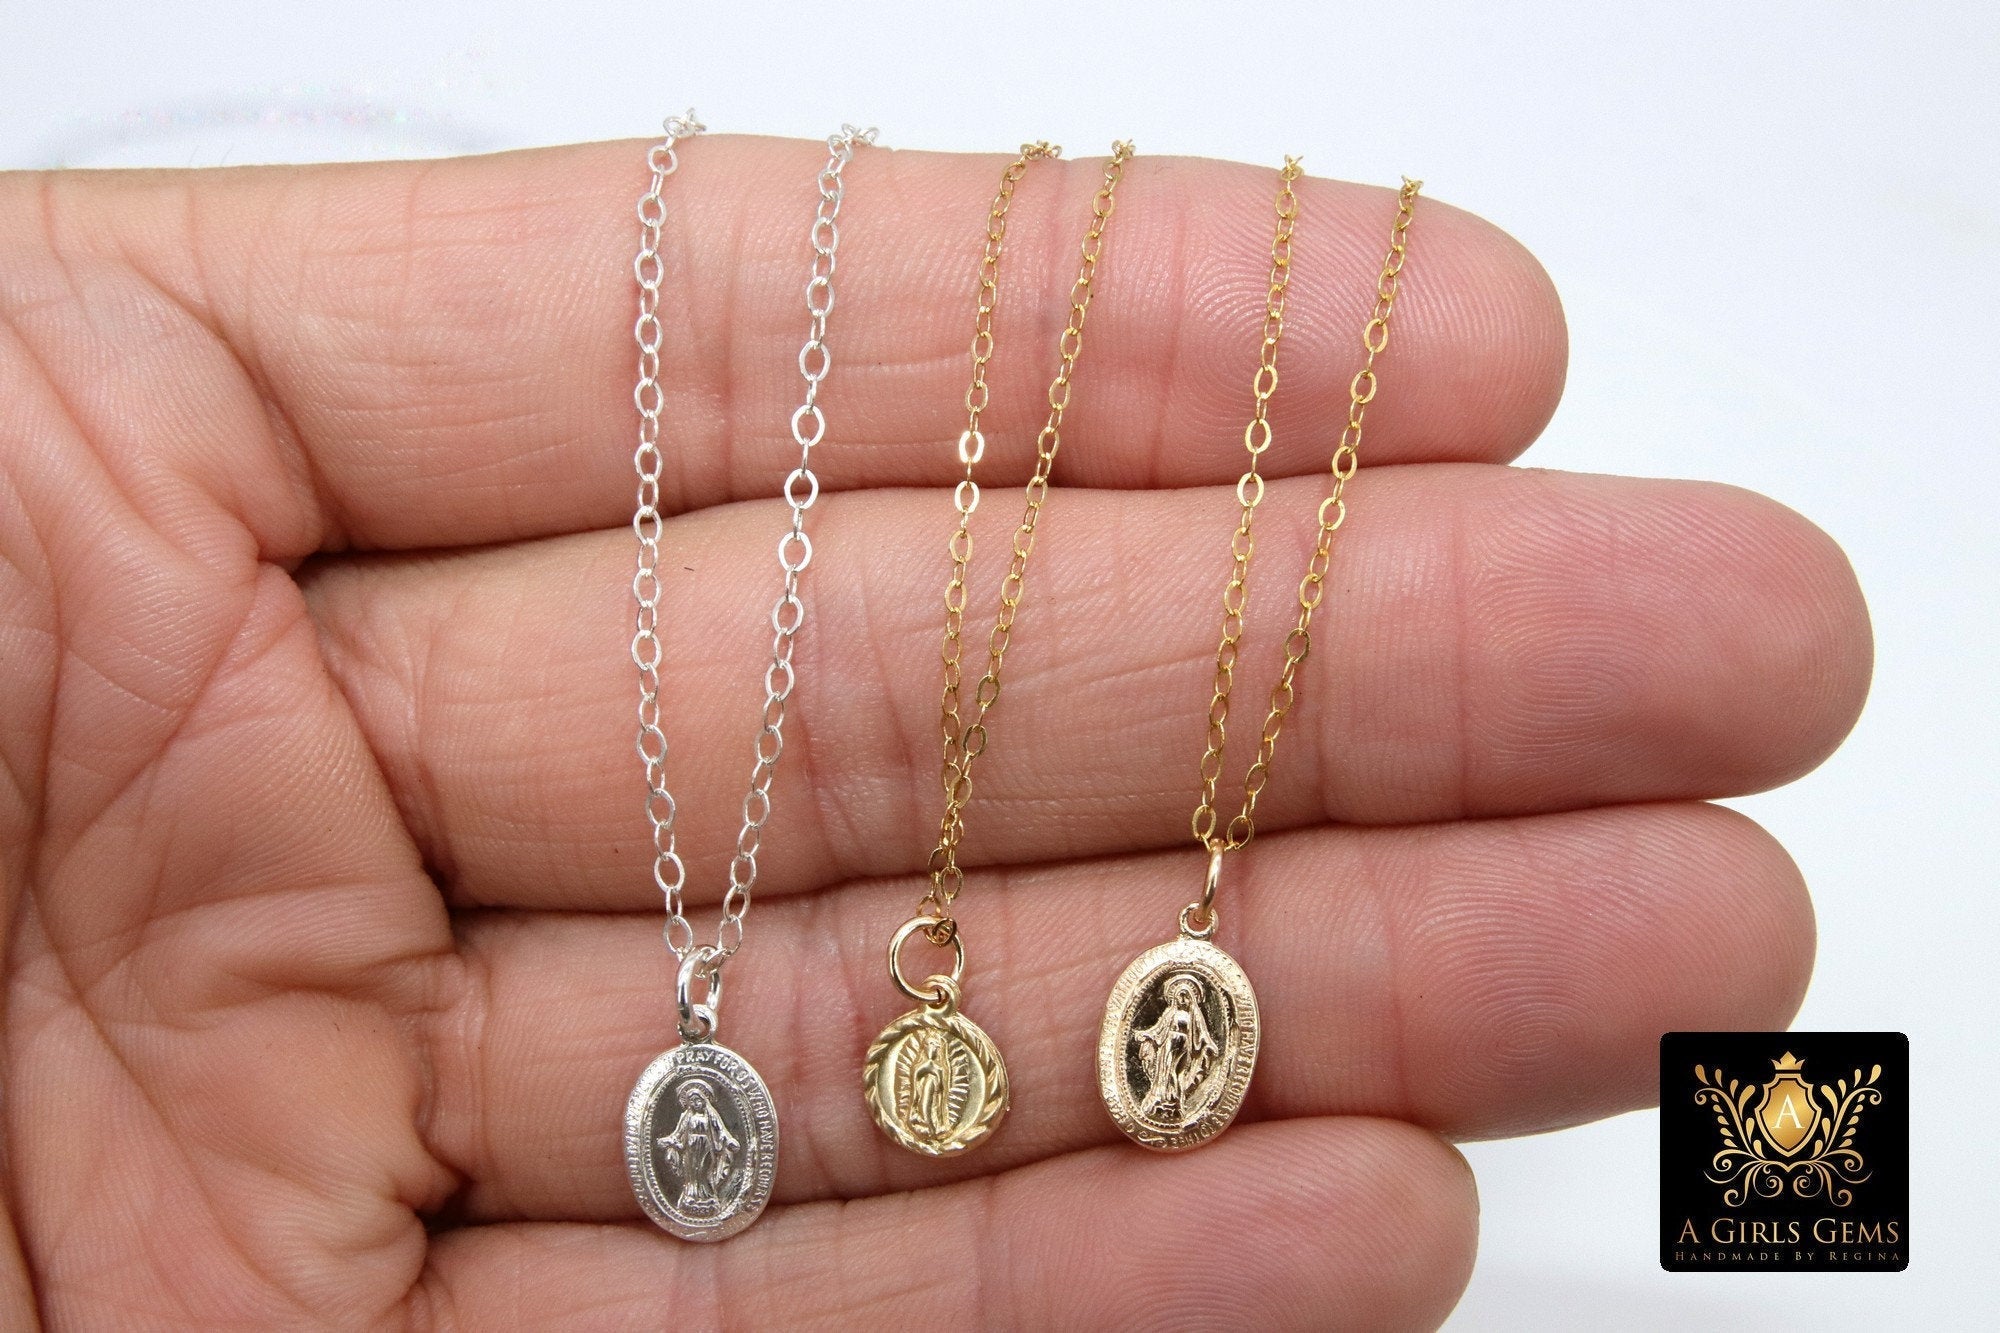 14 K Gold Filled Virgin Mary Hammered Chain Necklace, 925 Sterling Silver Mother Mary Choker, Mommy and Me Madonna Necklaces - A Girls Gems